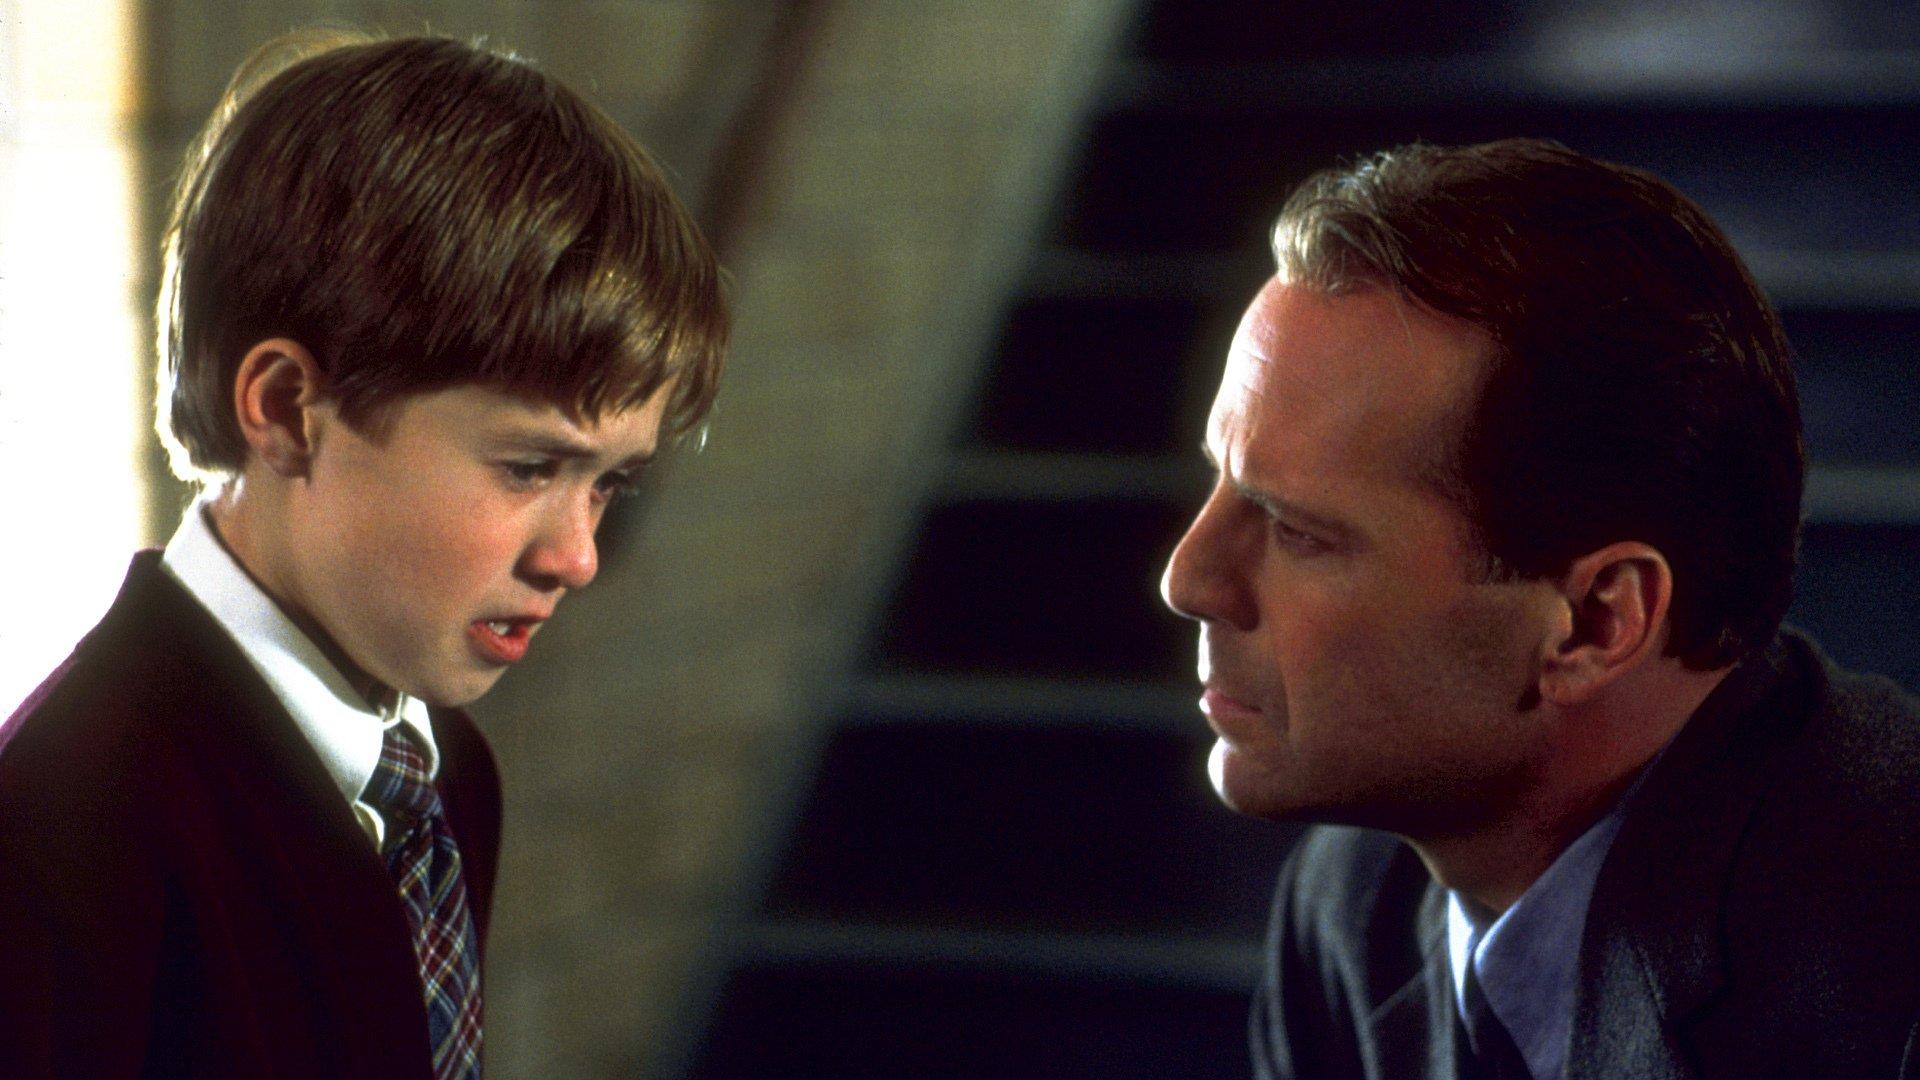 The Sixth Sense is one of the most popular horror films